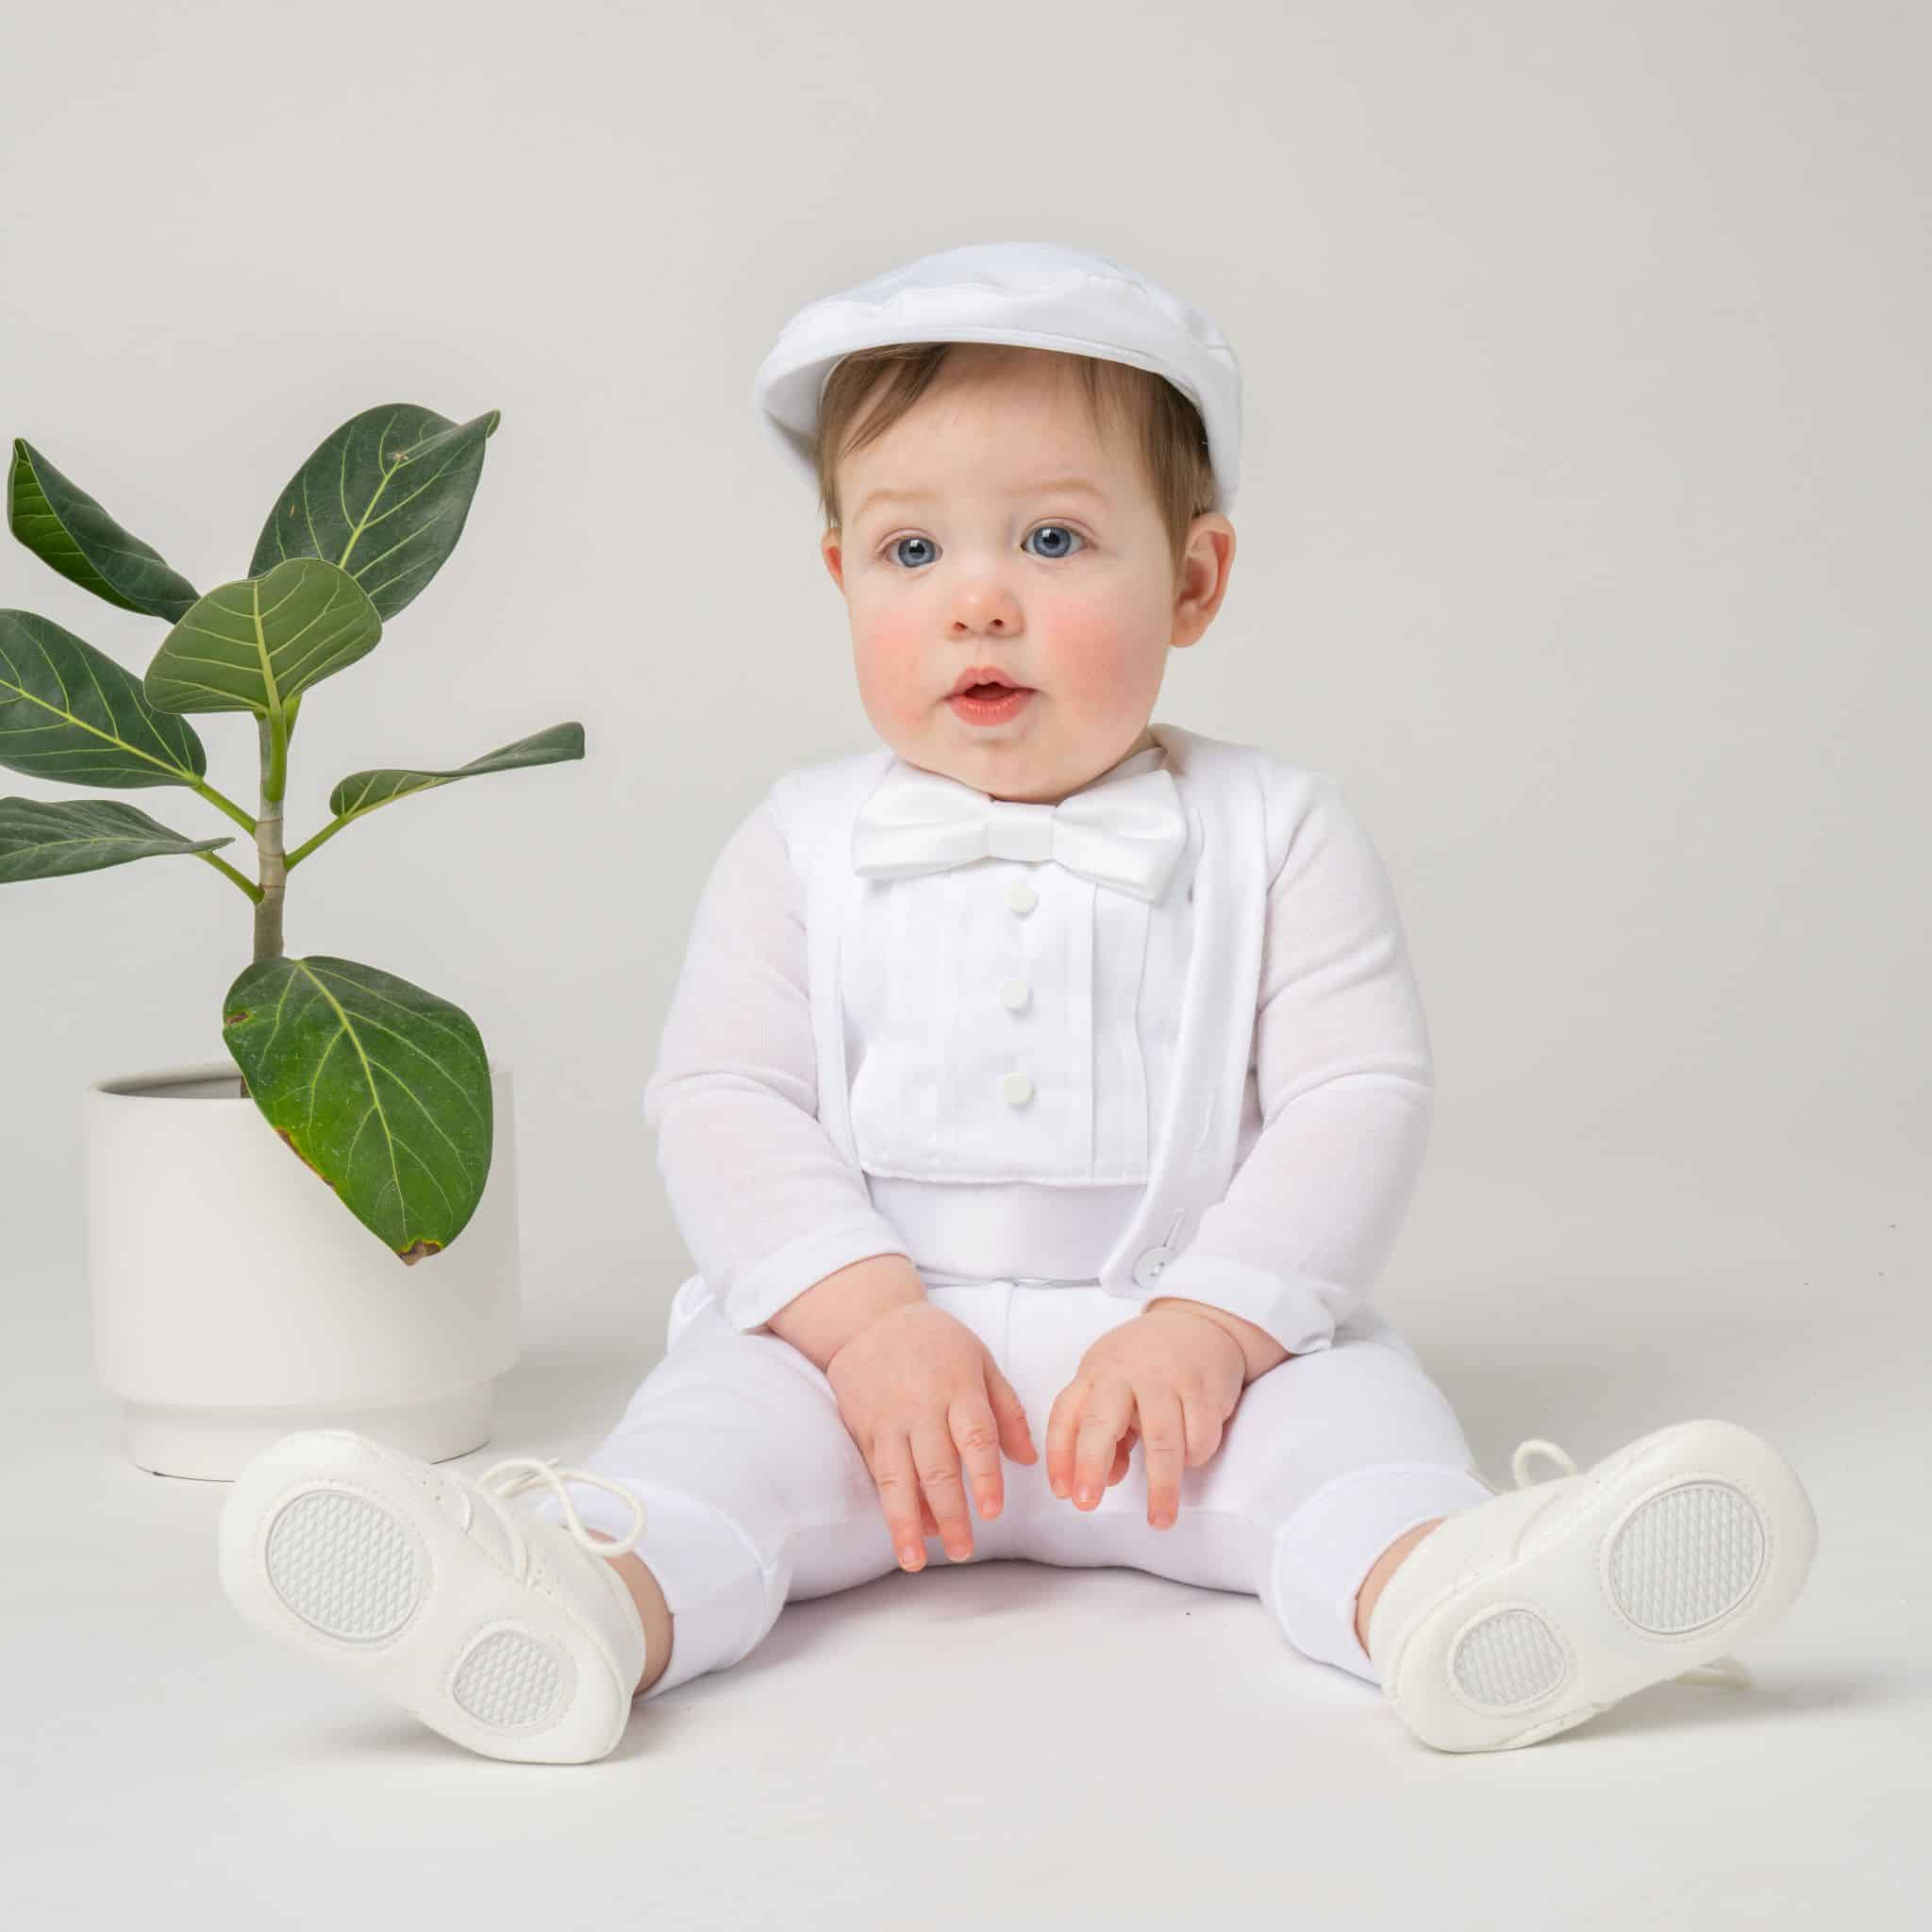 Baptism or Christening Suit | Cool Baptism Gifts for Boys | Baby Journey